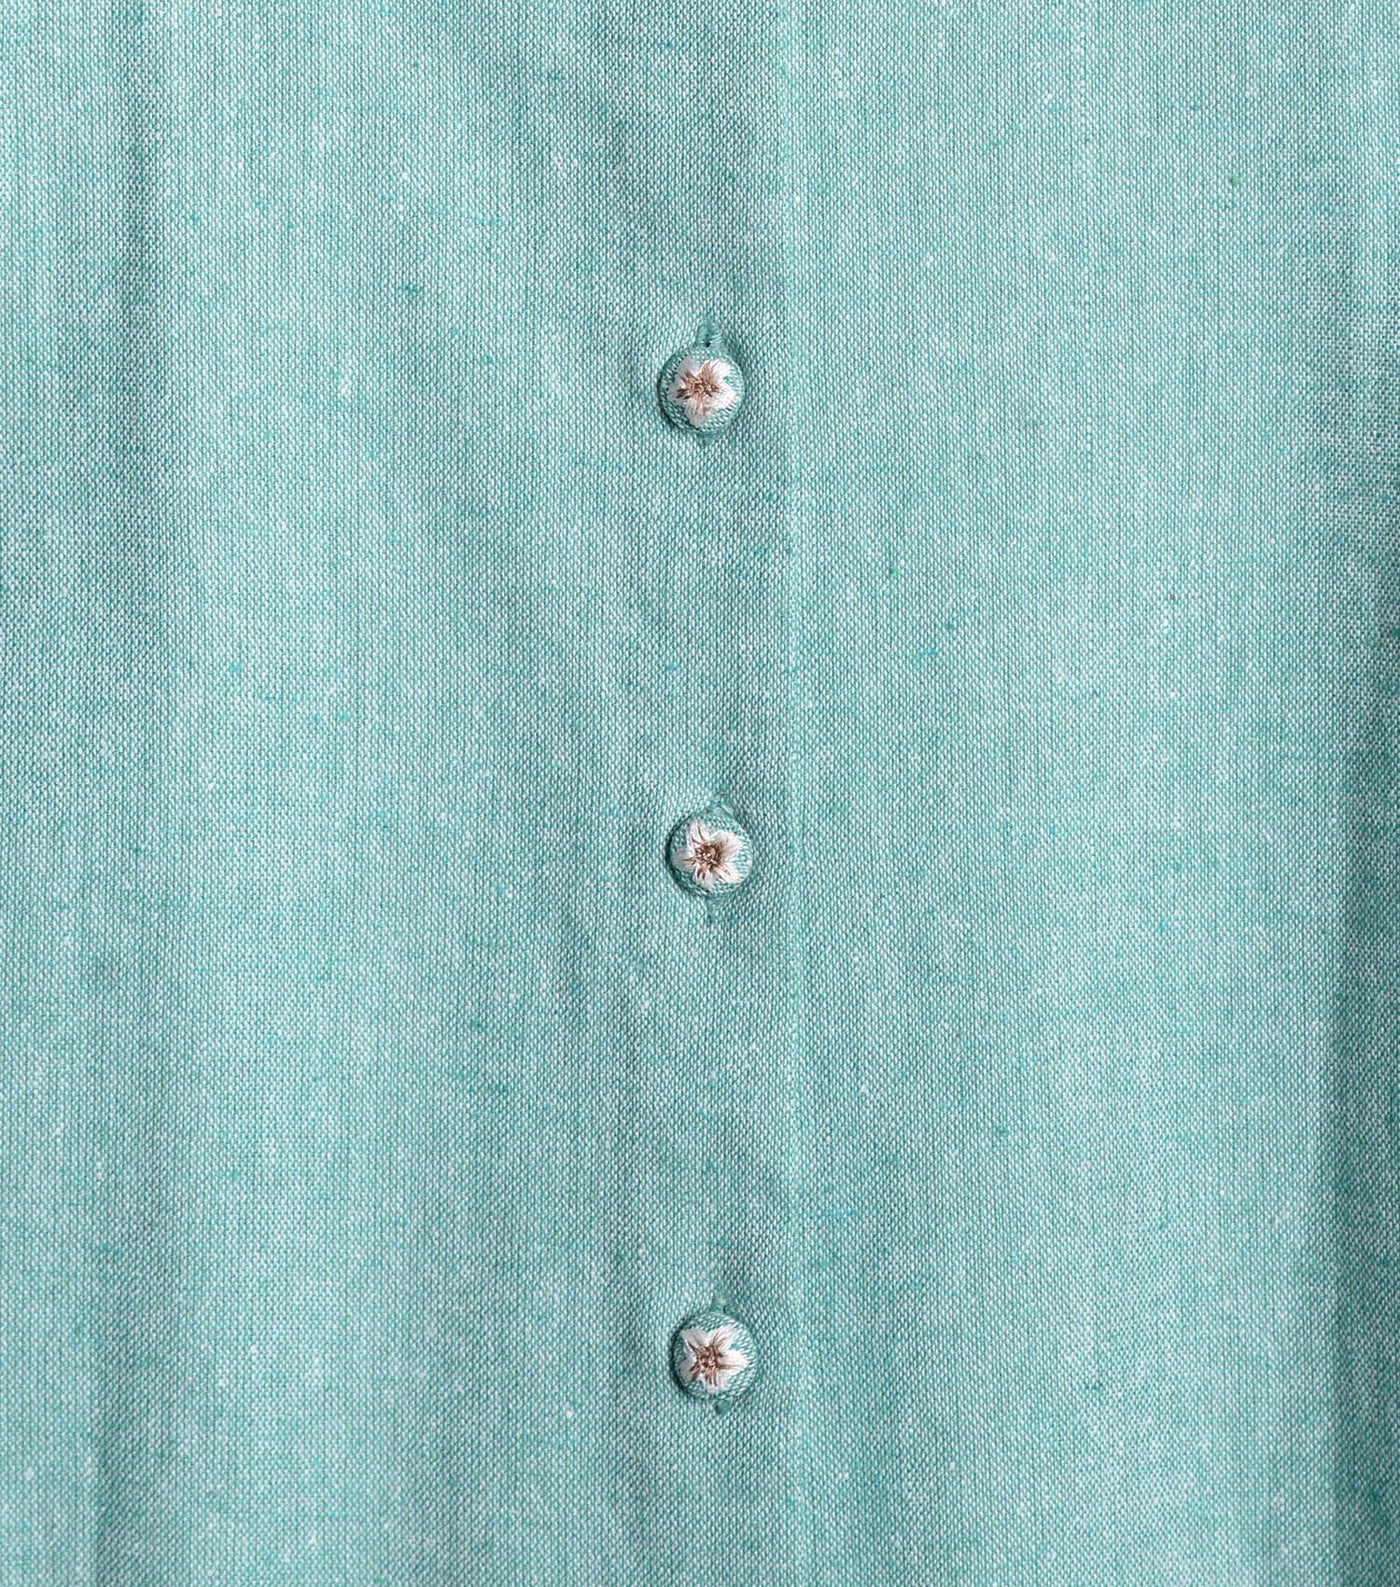 Teal chambray embroidered dress